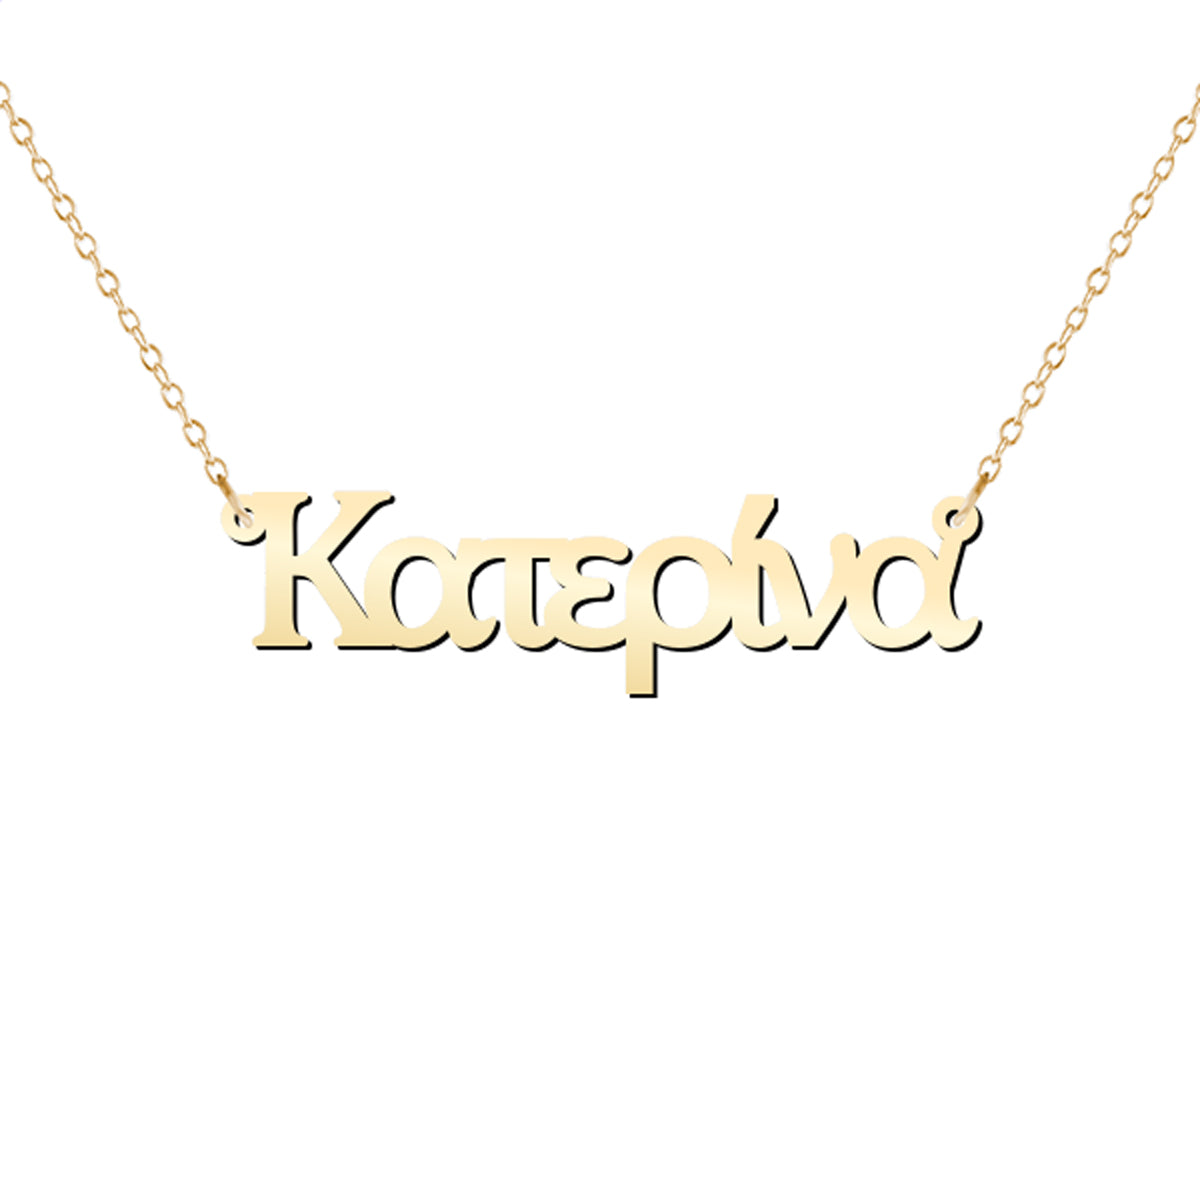 Greek Personalized Name Necklace in Classic Font